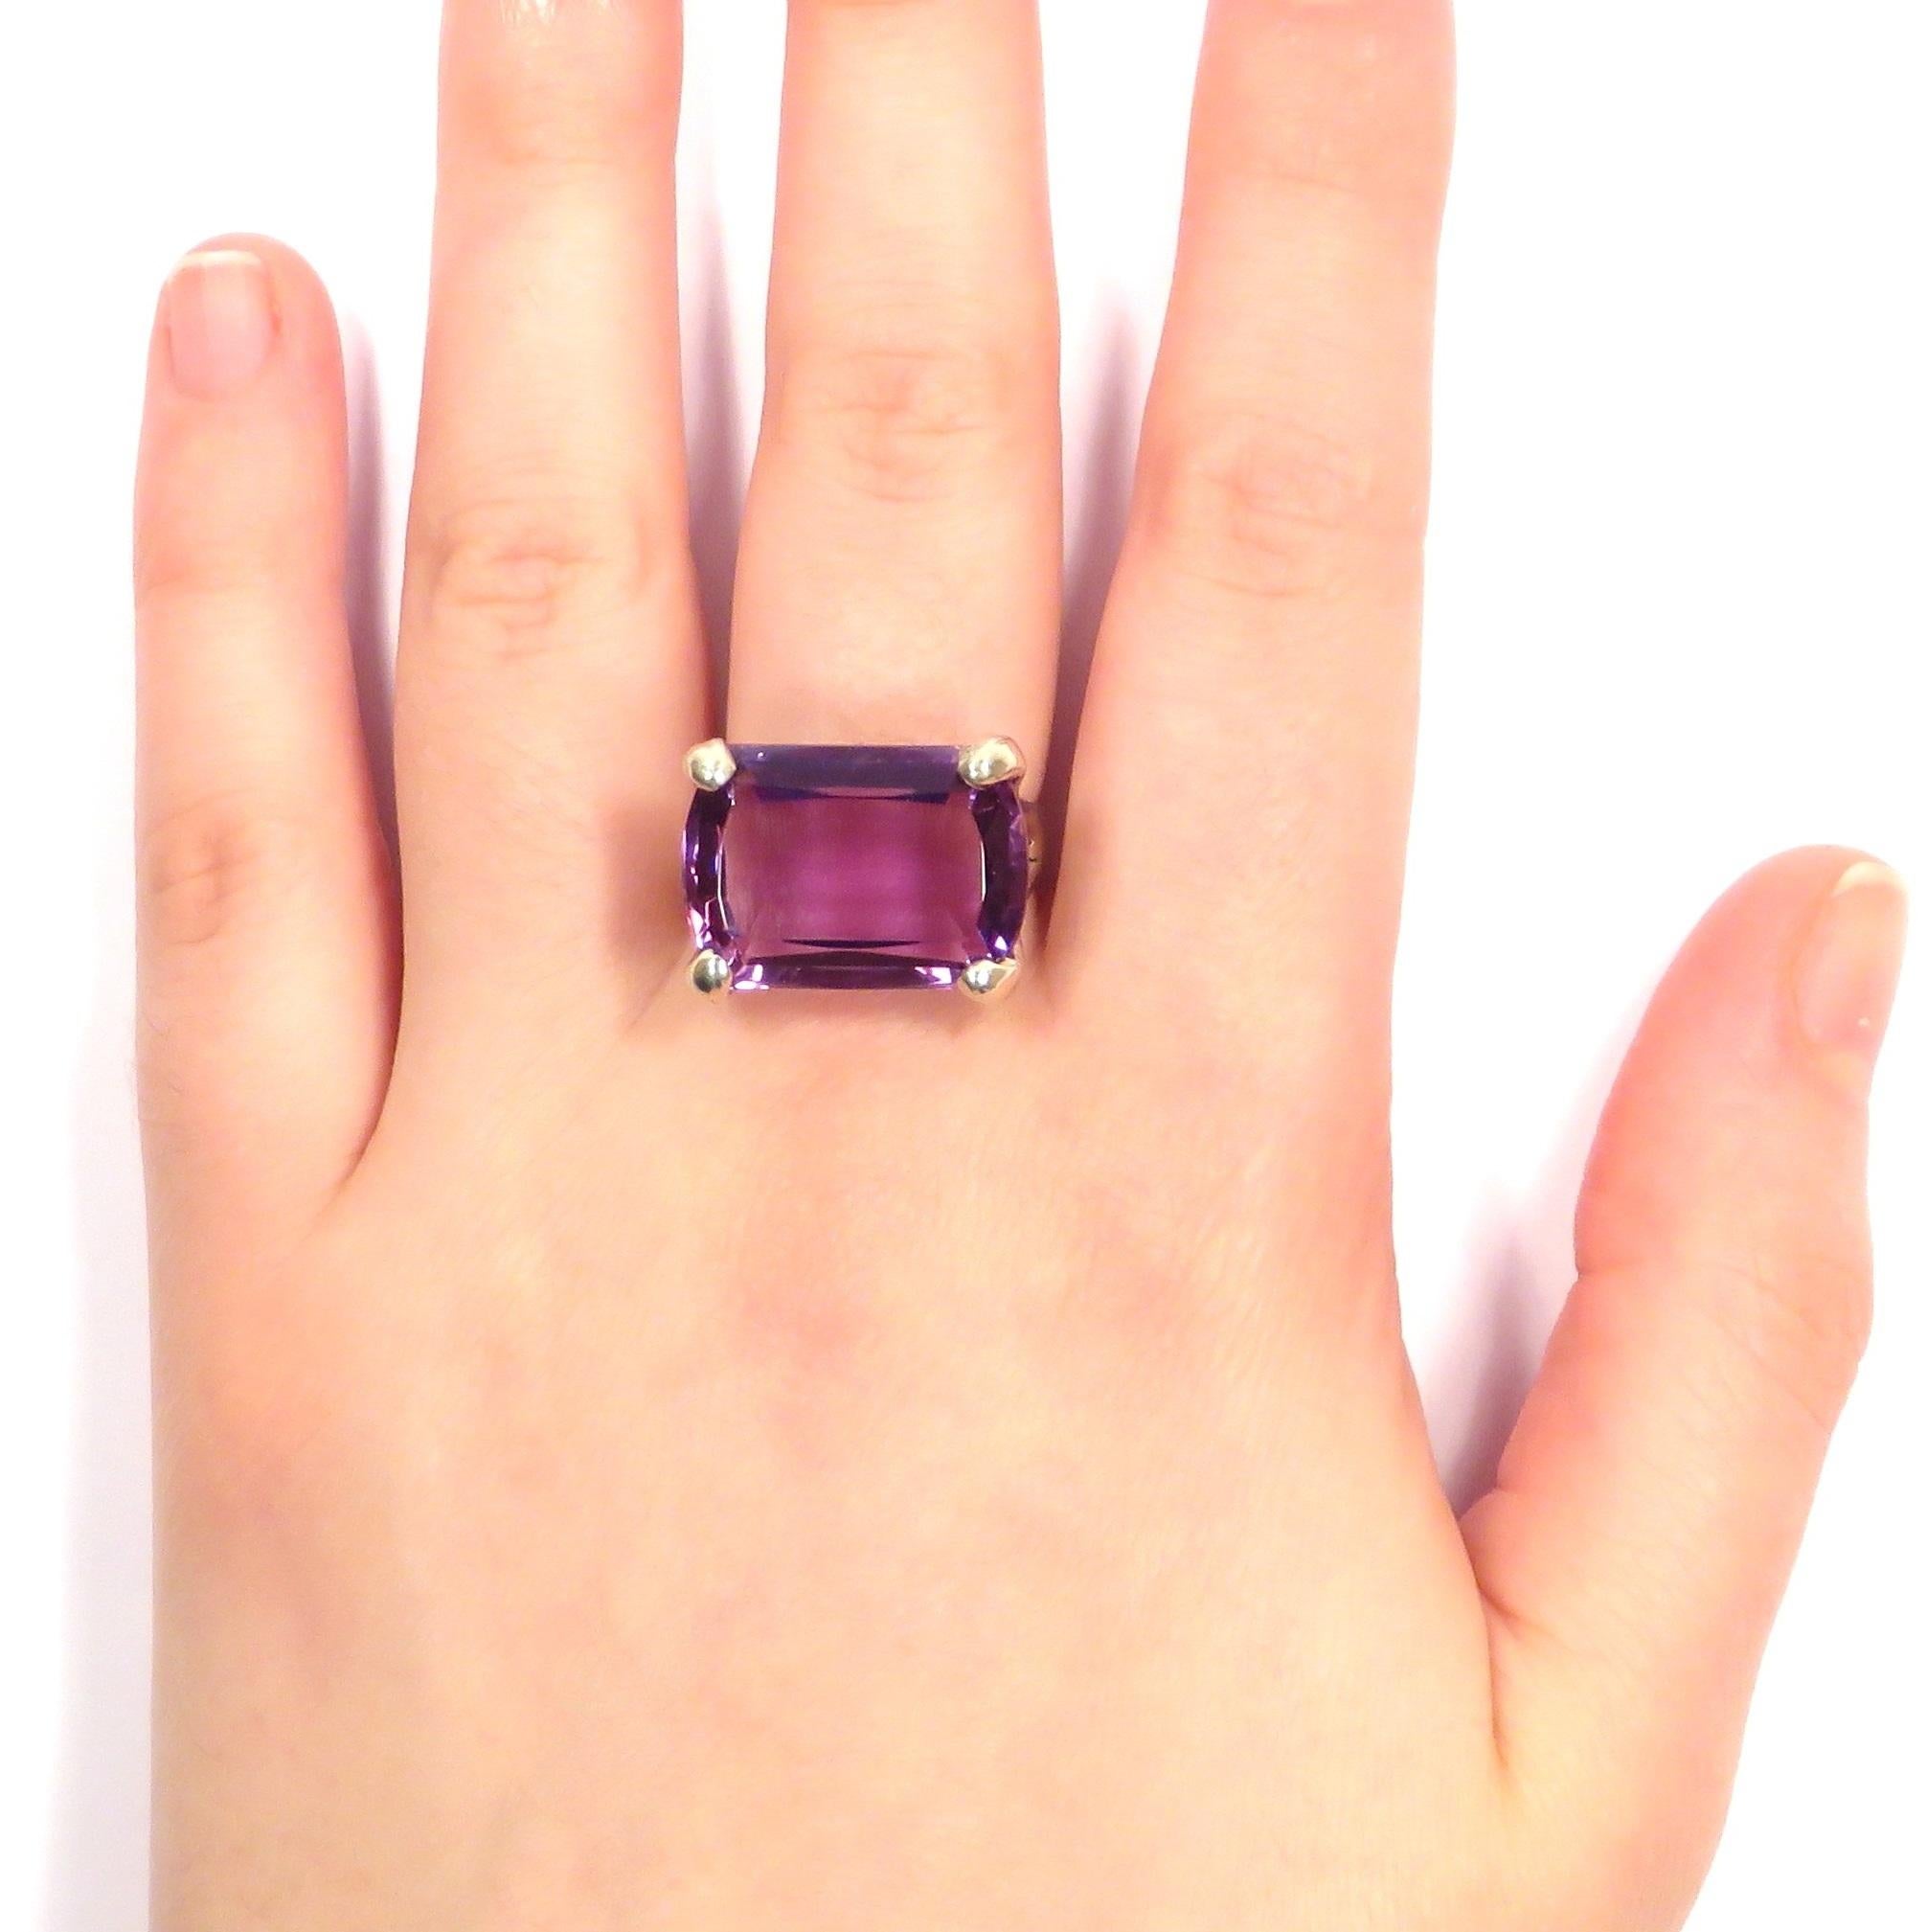 Emerald Cut Amethyst 9 Karat White Gold Cocktail Ring Handcrafted in Italy